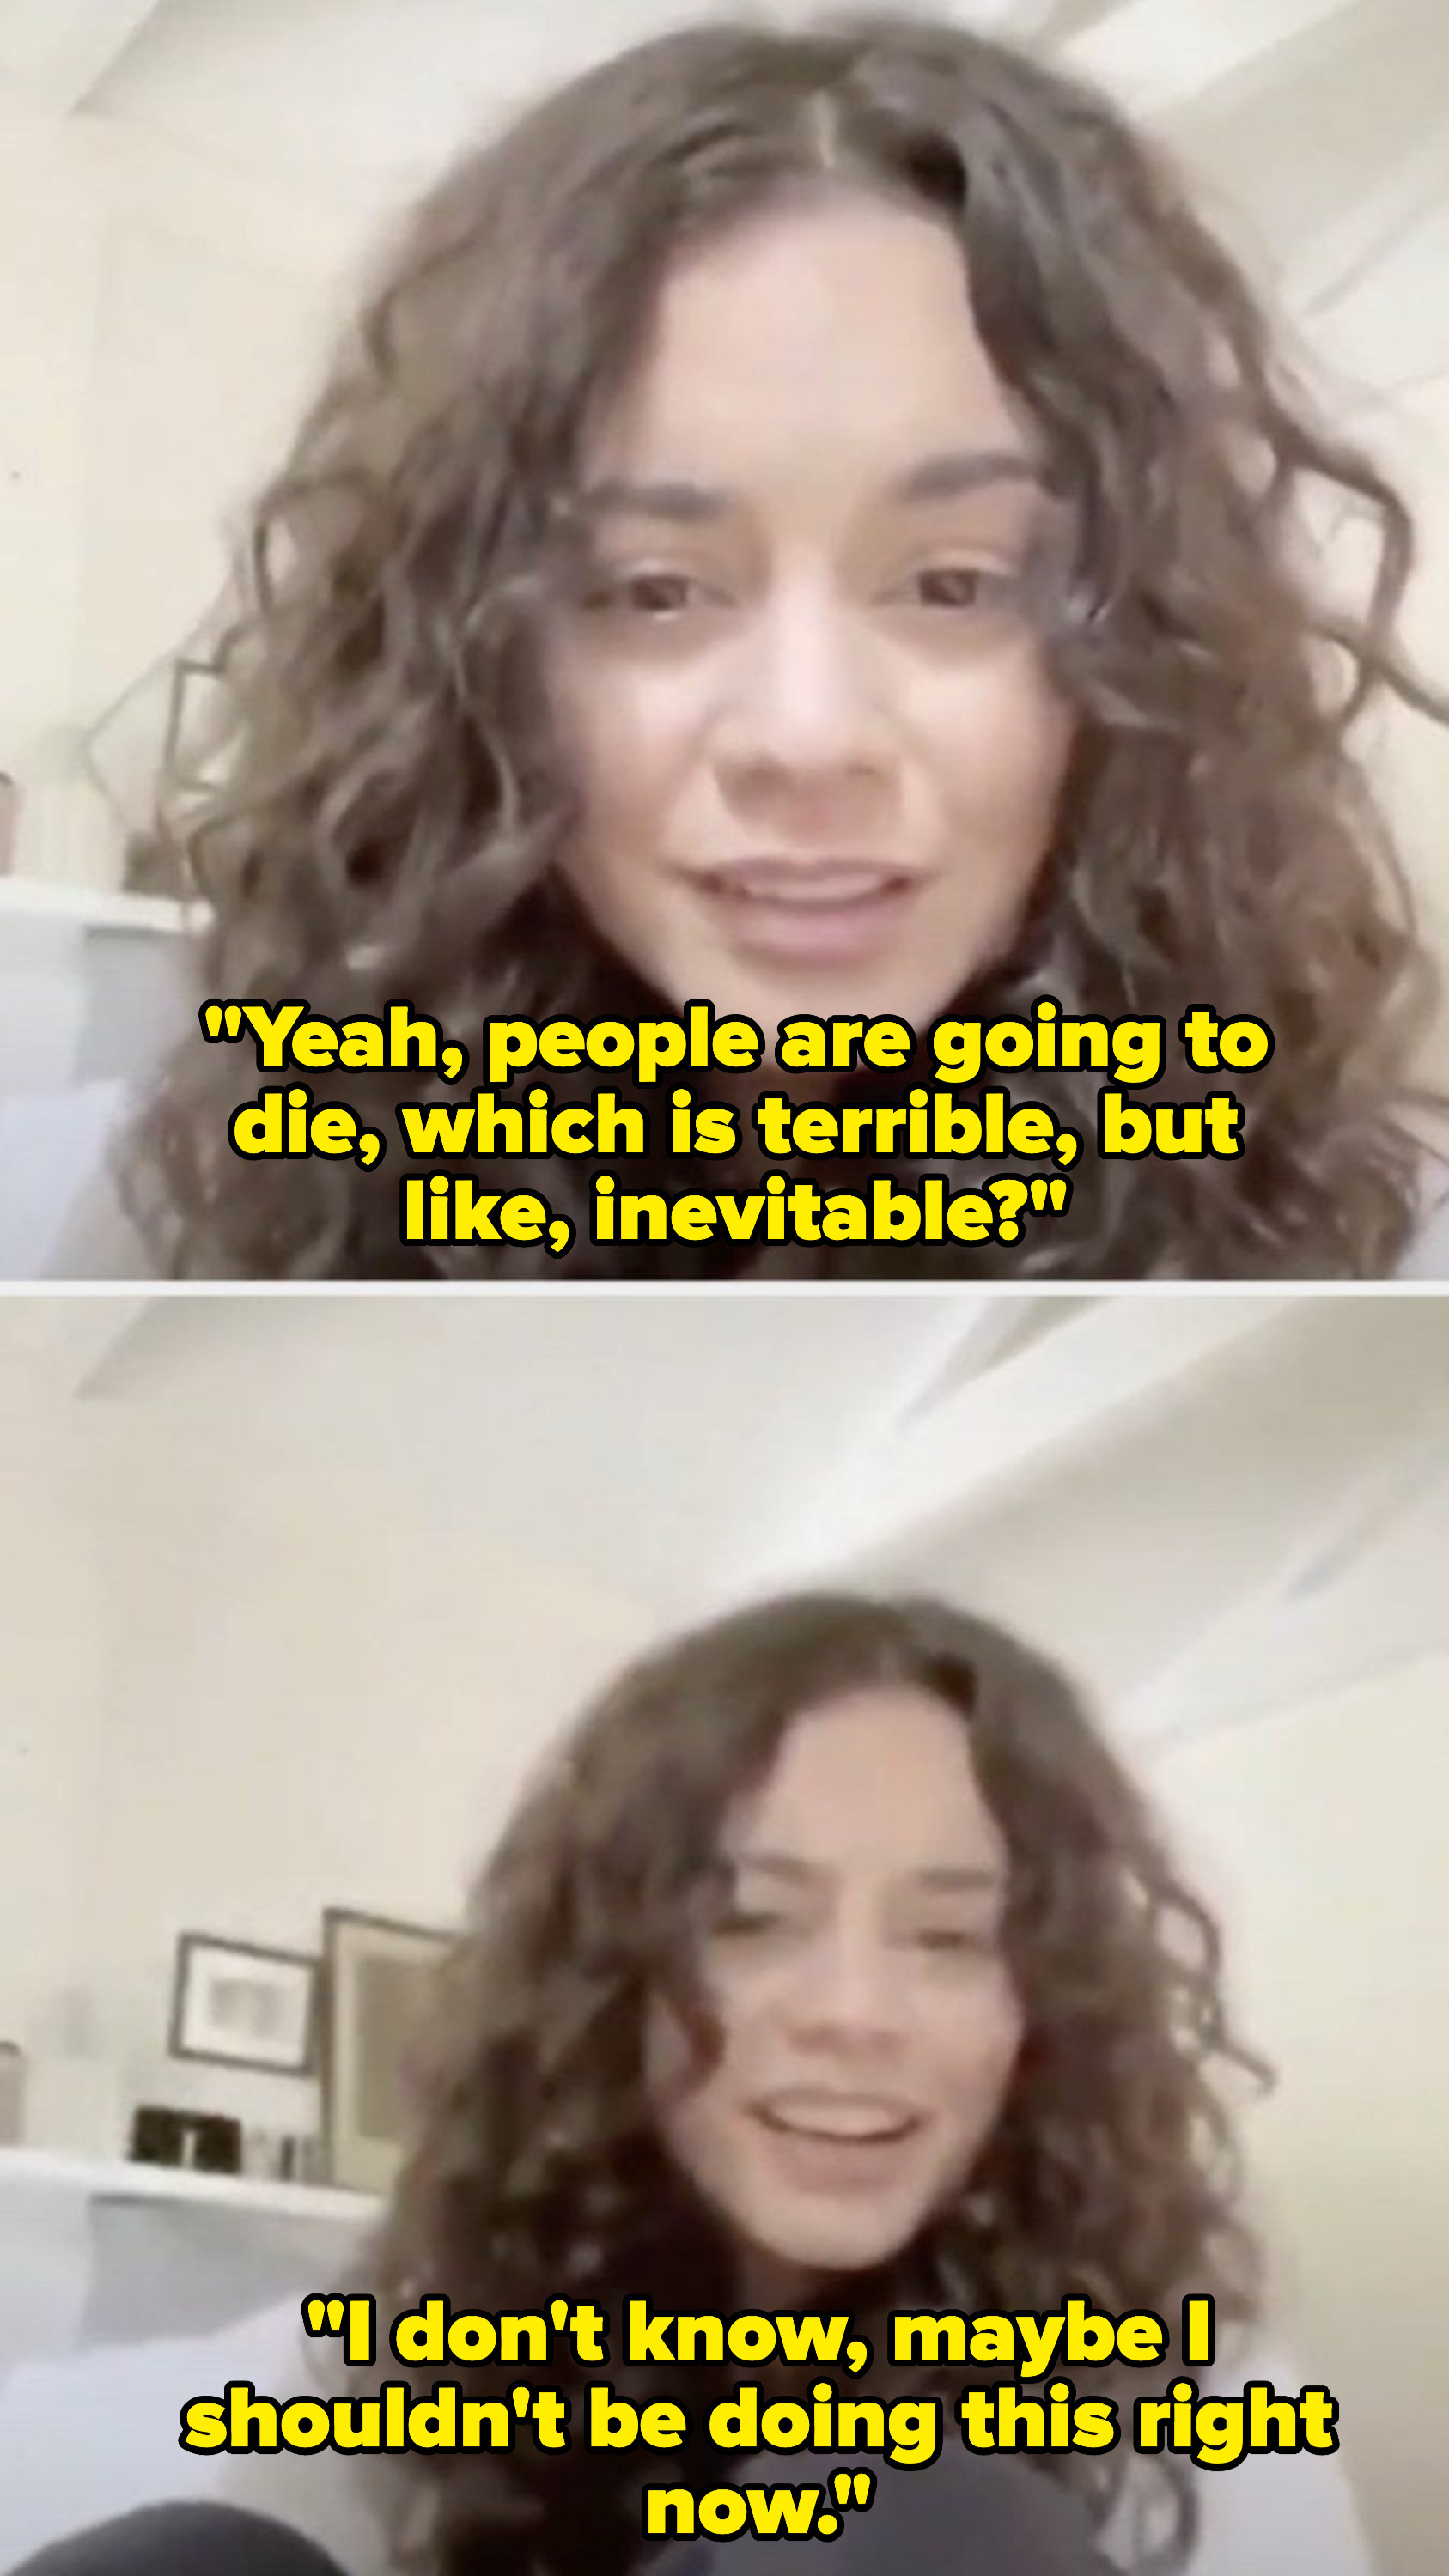 Top: Vanessa Hudgens says &quot;Yeah, people are going to die, which is terrible, but like, inevitable?&quot; Bottom: Vanessa Hudgens says &quot;I don&#x27;t know, maybe I shouldn&#x27;t be doing this right now.&quot;